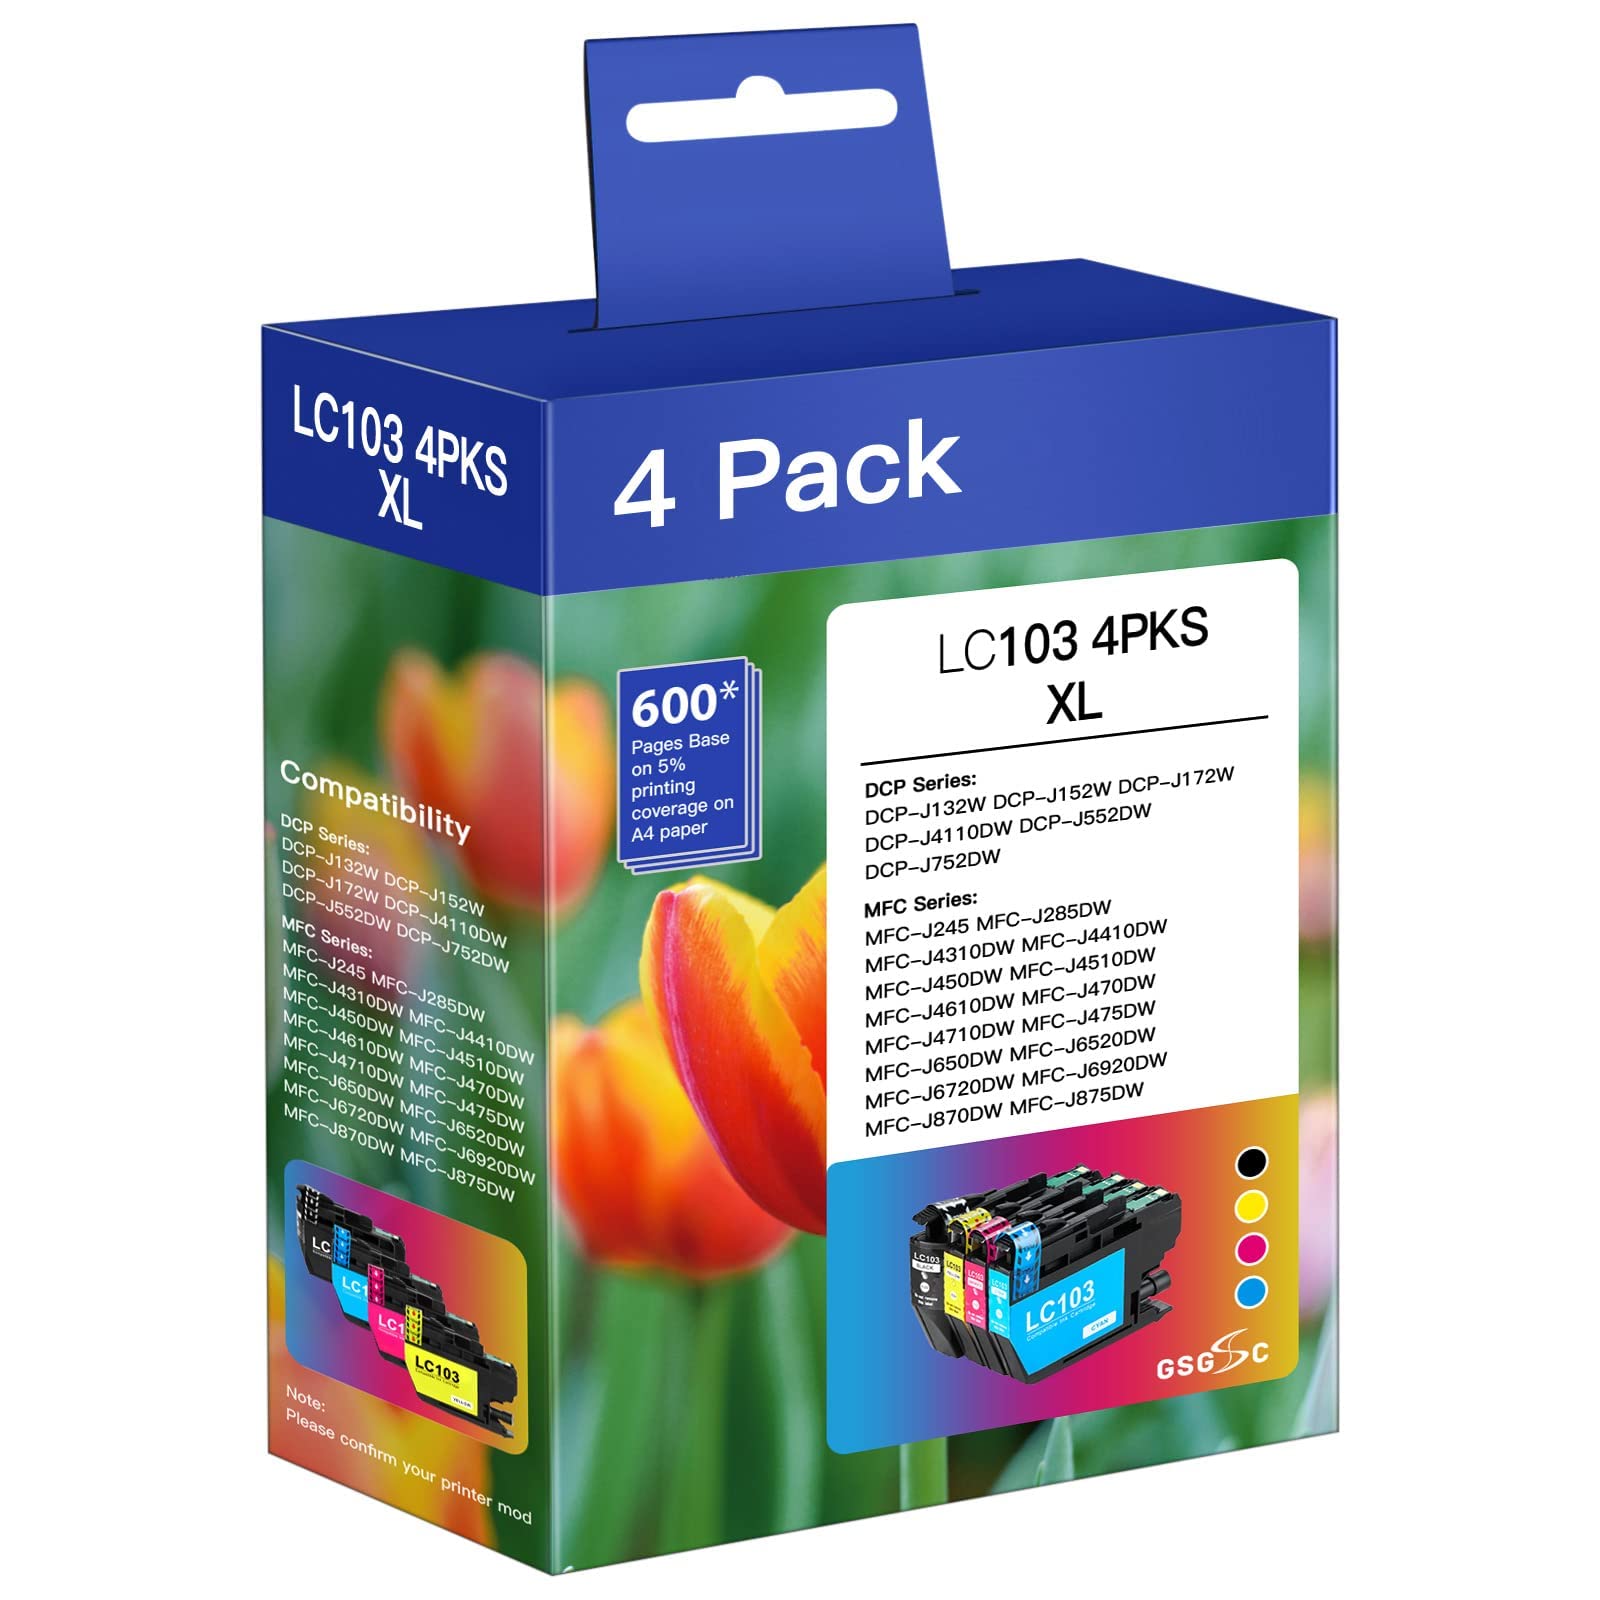 GSGSC LC103 Ink cartridges Replacement for Brother Printer lc103XL lc101 cartridges, Compatible with MFC-J870DW MFC-J6920DW MFC-J6520DW MFC-J450DW MFC-J470DW (1 Black, 1 Cyan, Magenta, Yellow)